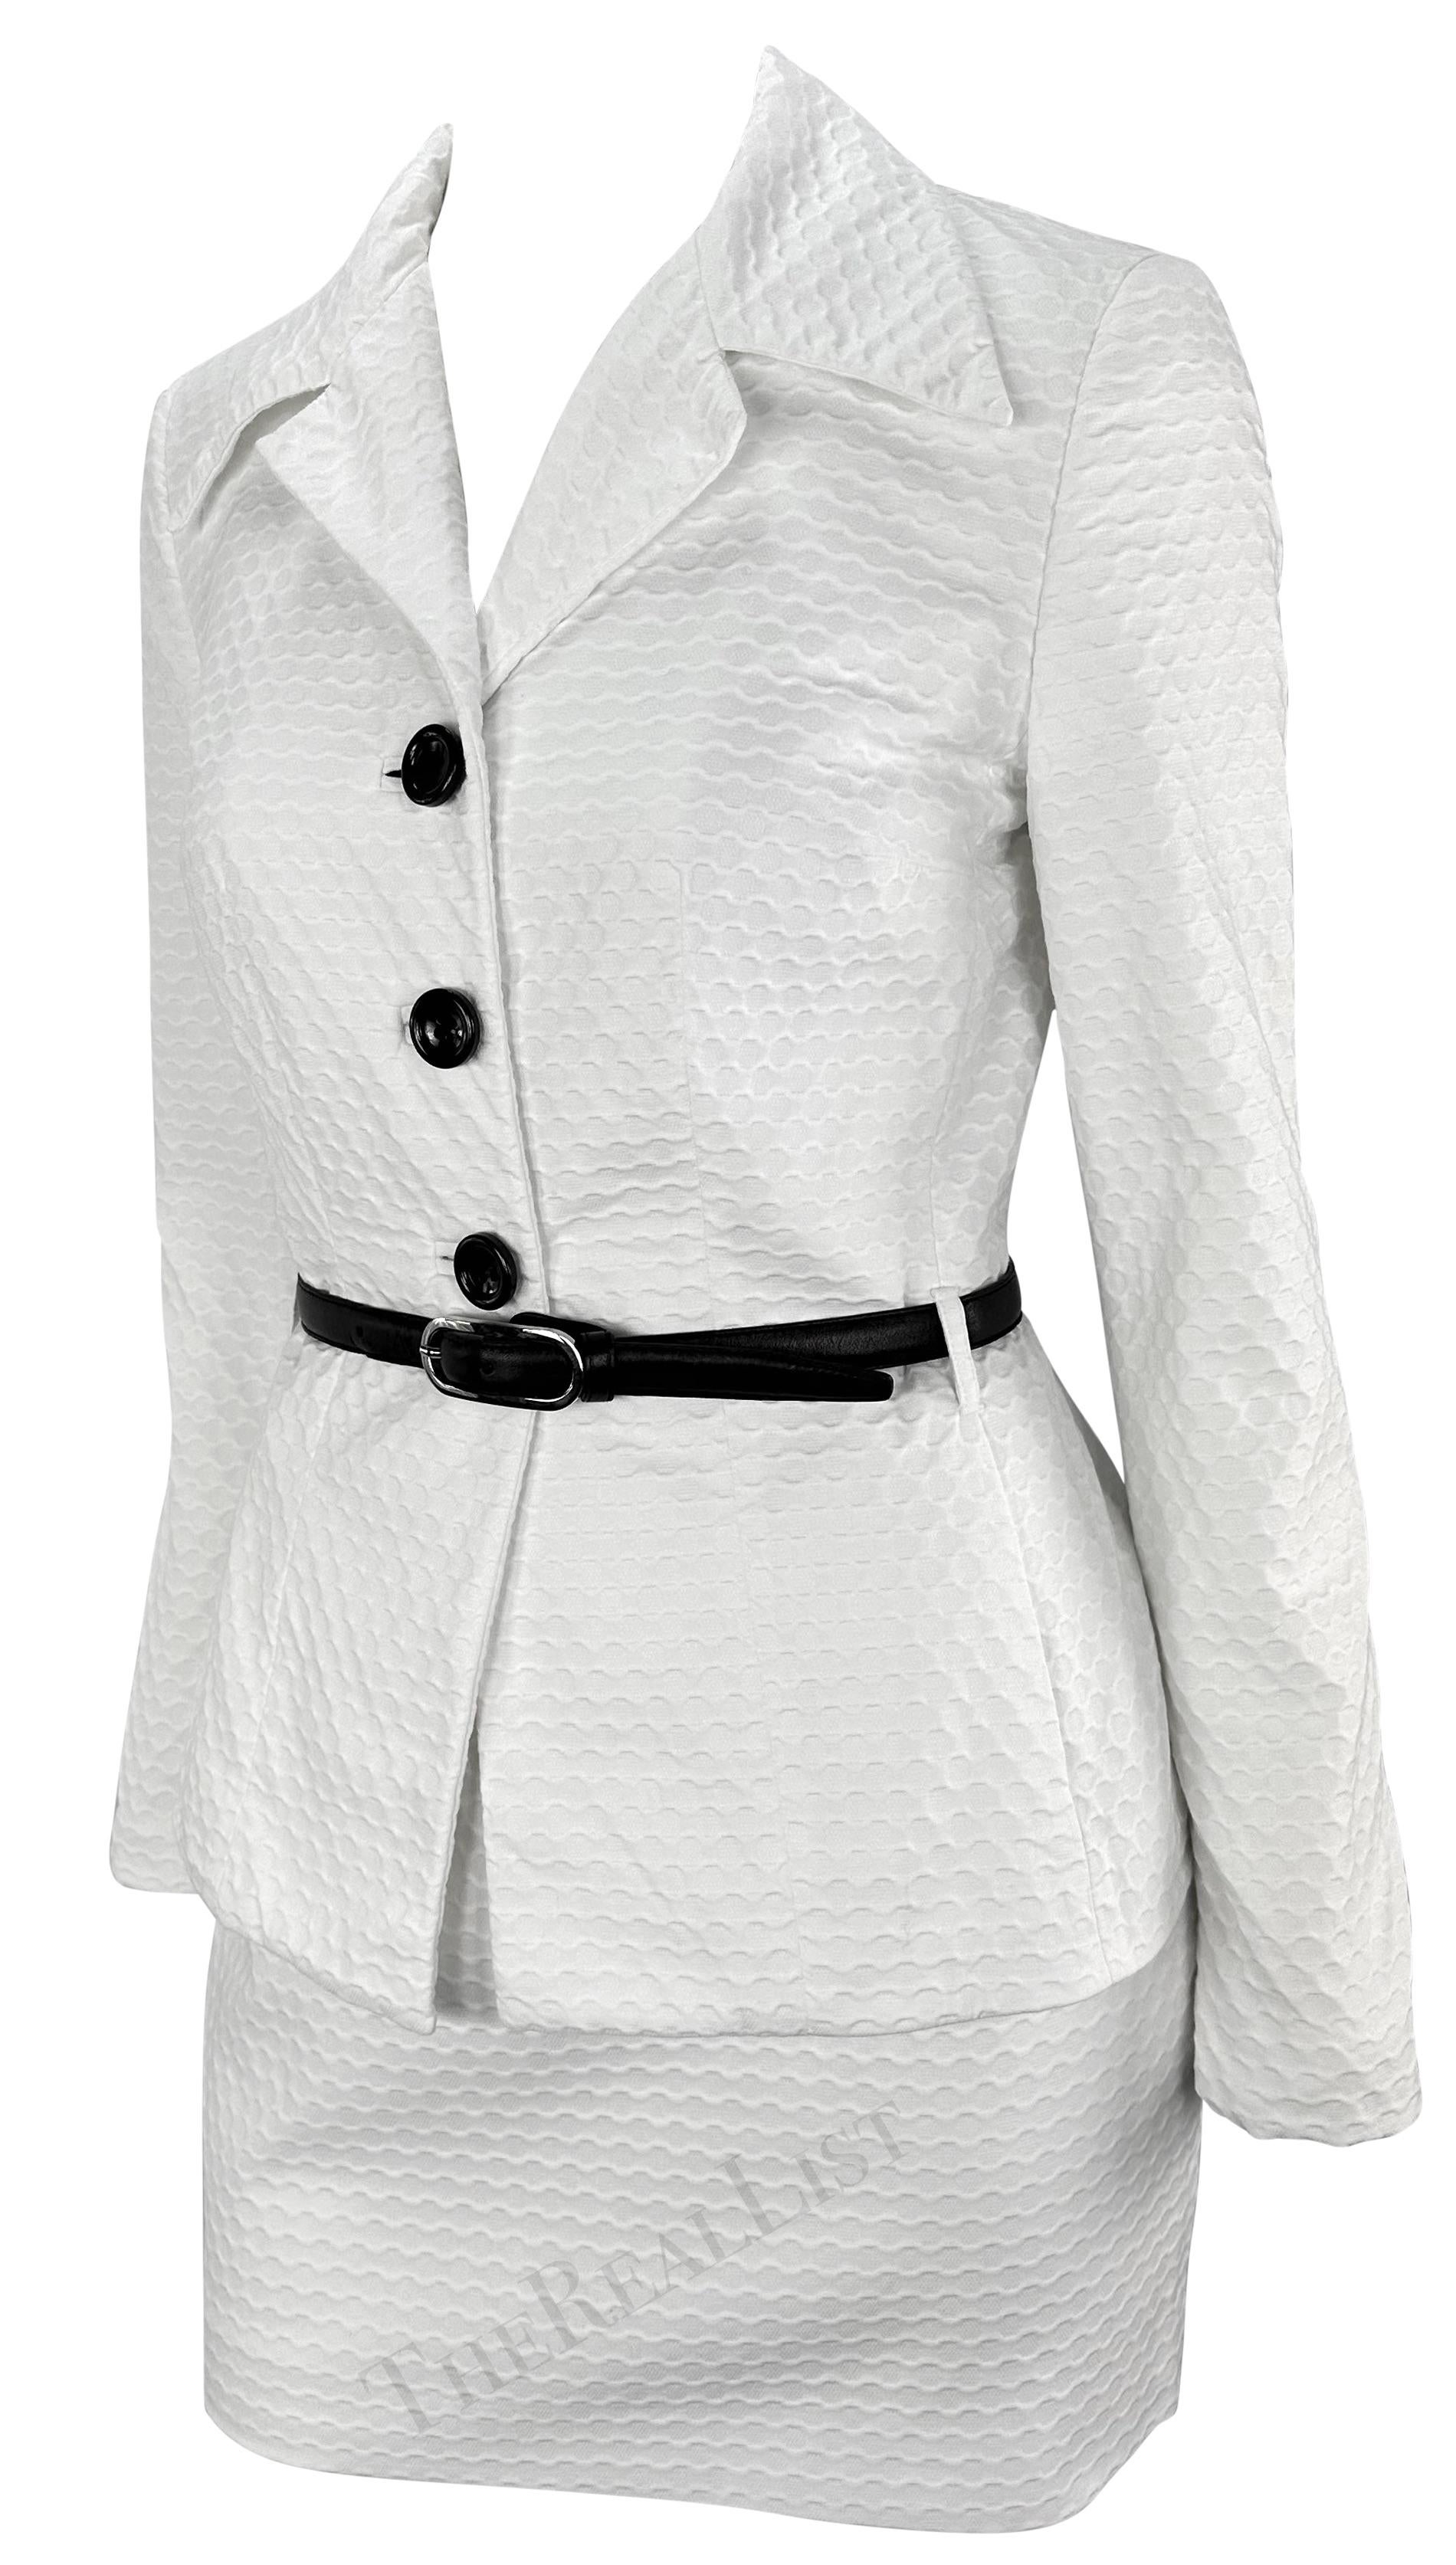 S/S 1995 Dolce & Gabbana Belted White Waffle Knit Mini Skirt Suit In Excellent Condition For Sale In West Hollywood, CA